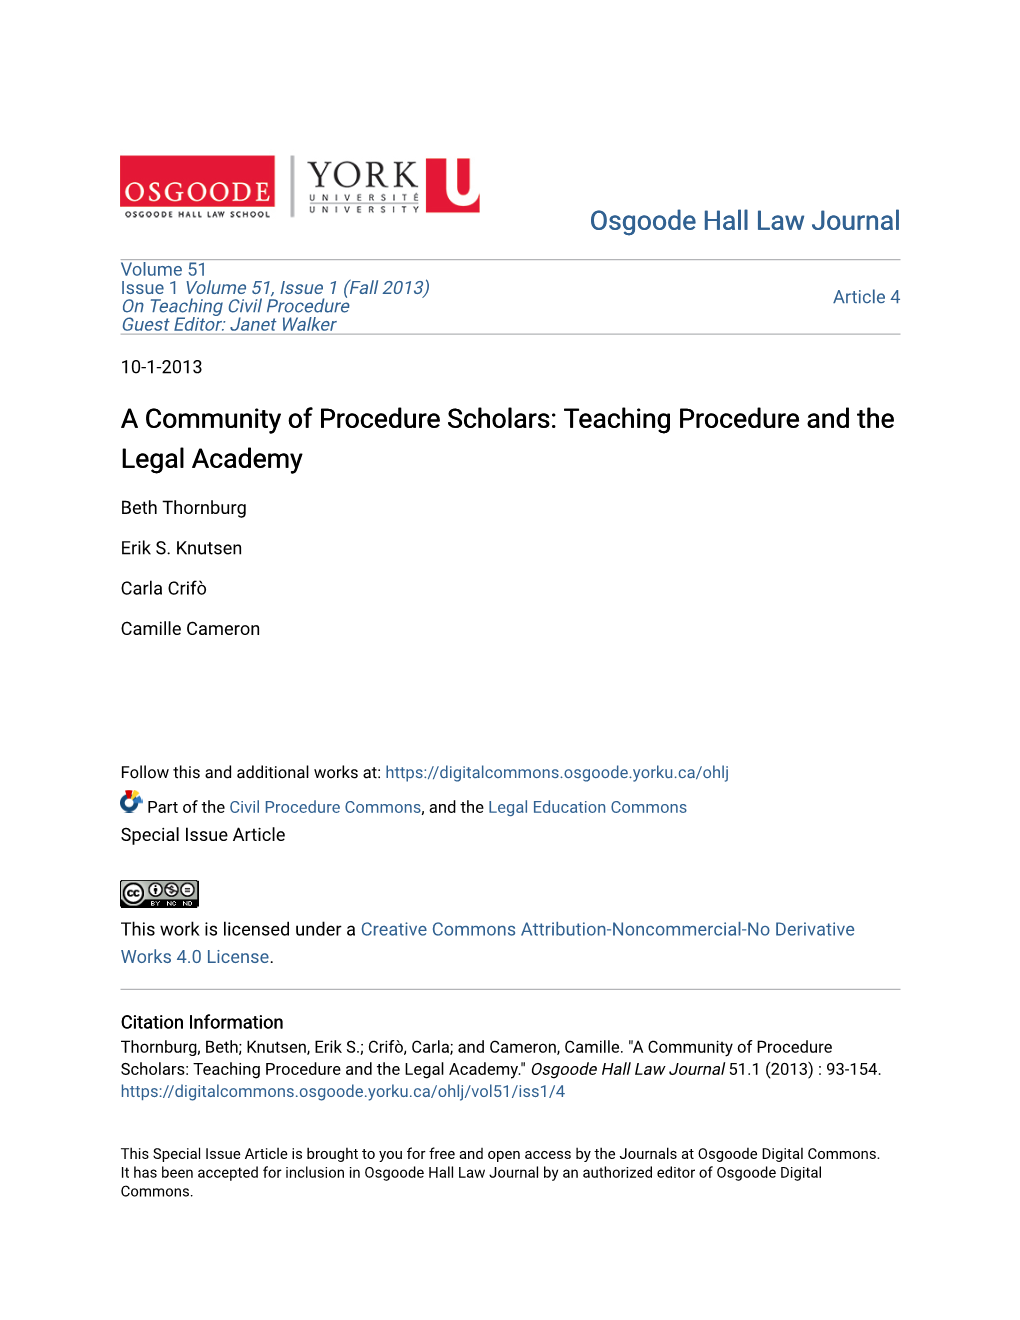 Teaching Procedure and the Legal Academy